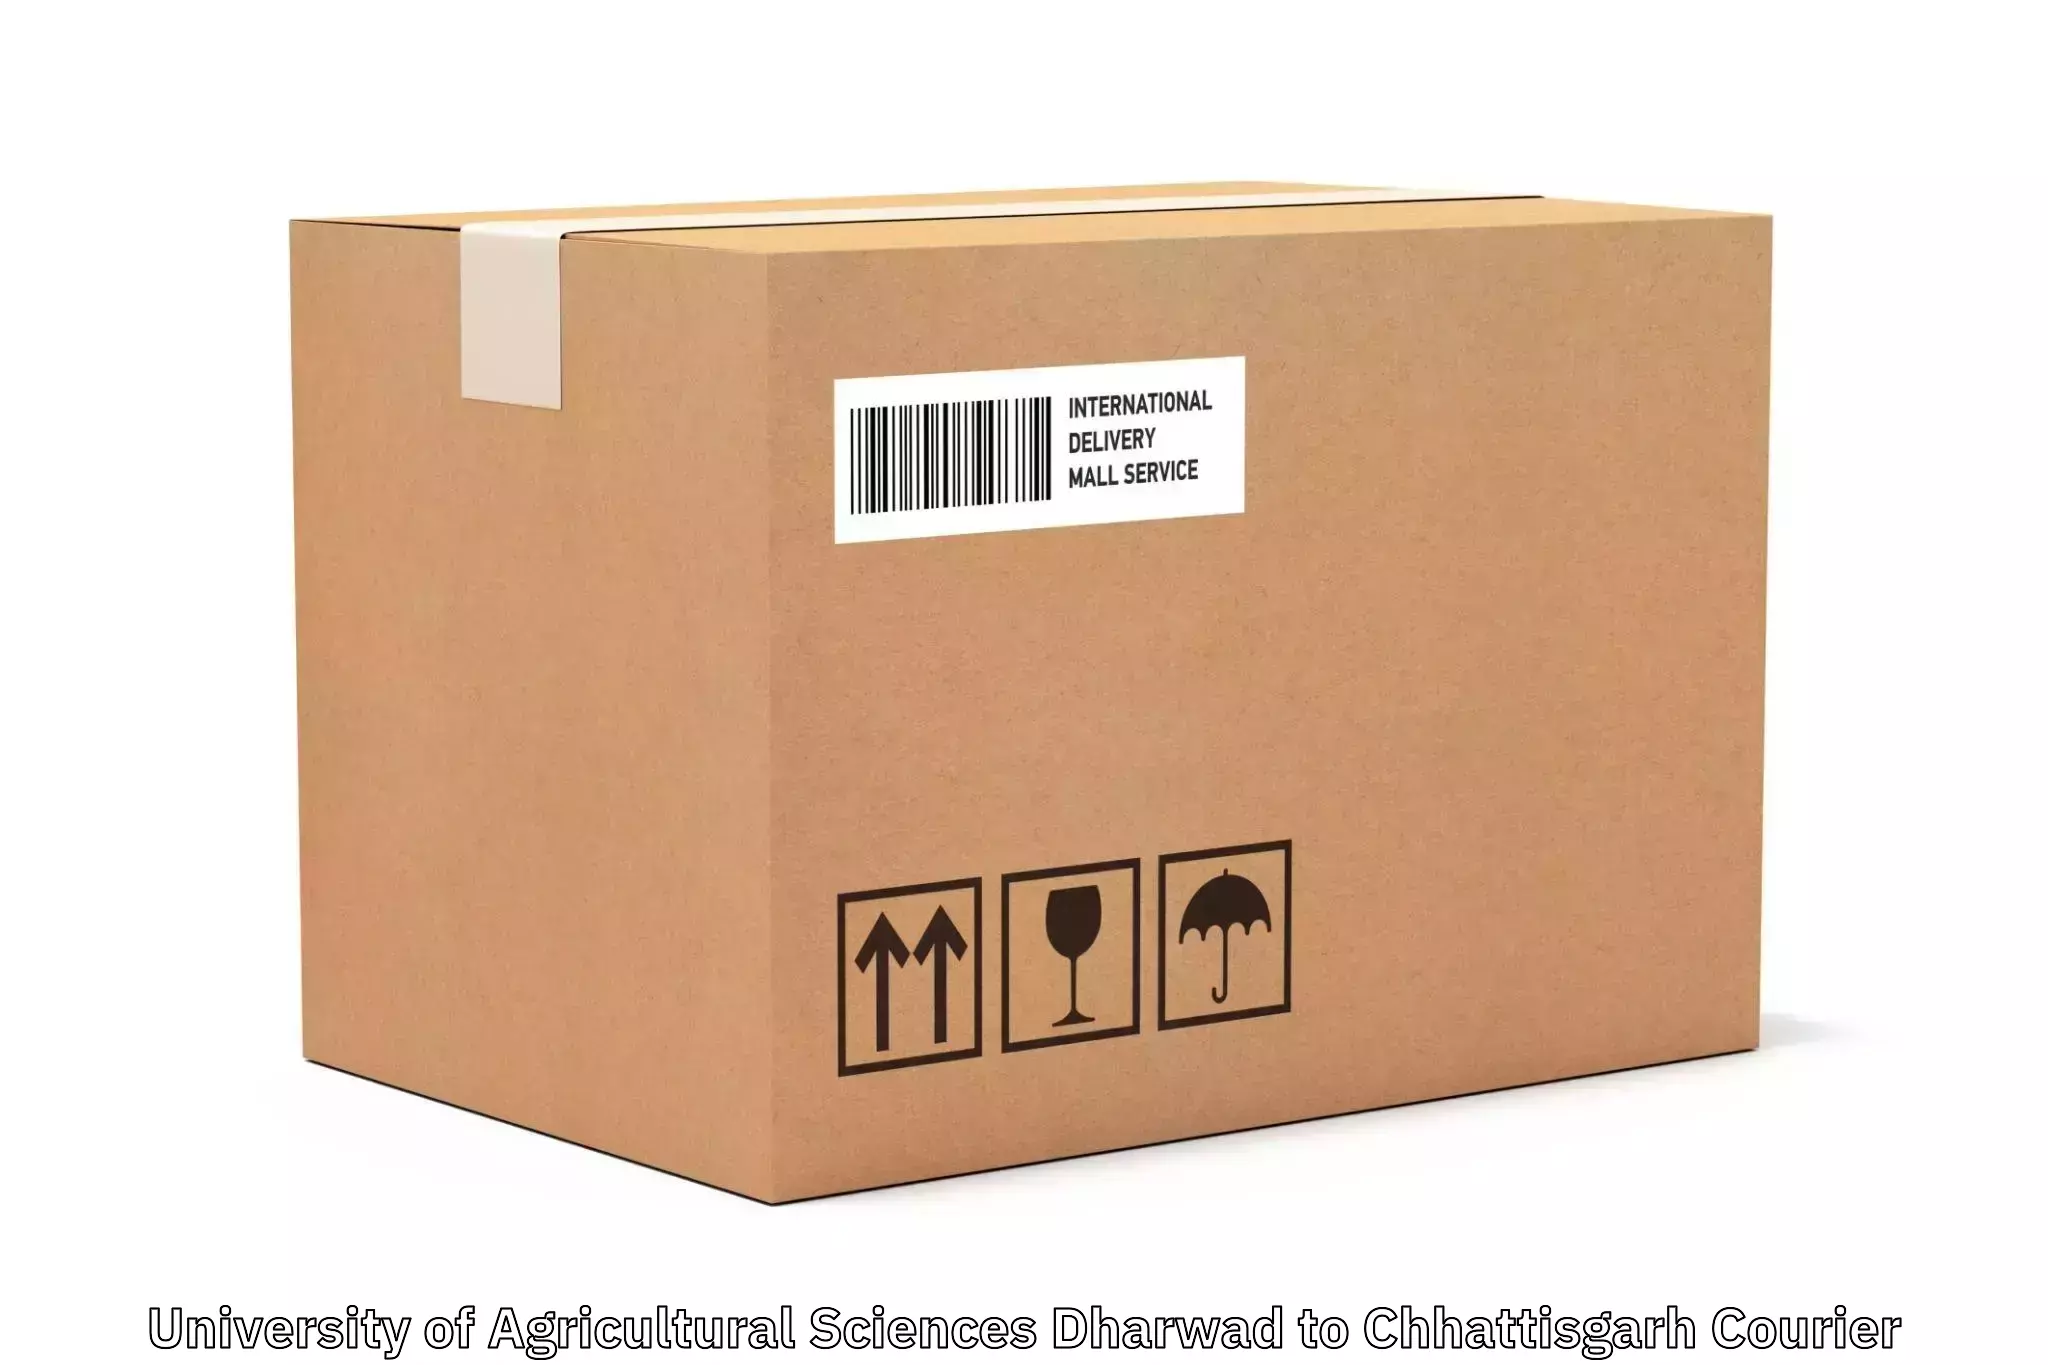 Parcel handling and care in University of Agricultural Sciences Dharwad to Chhattisgarh